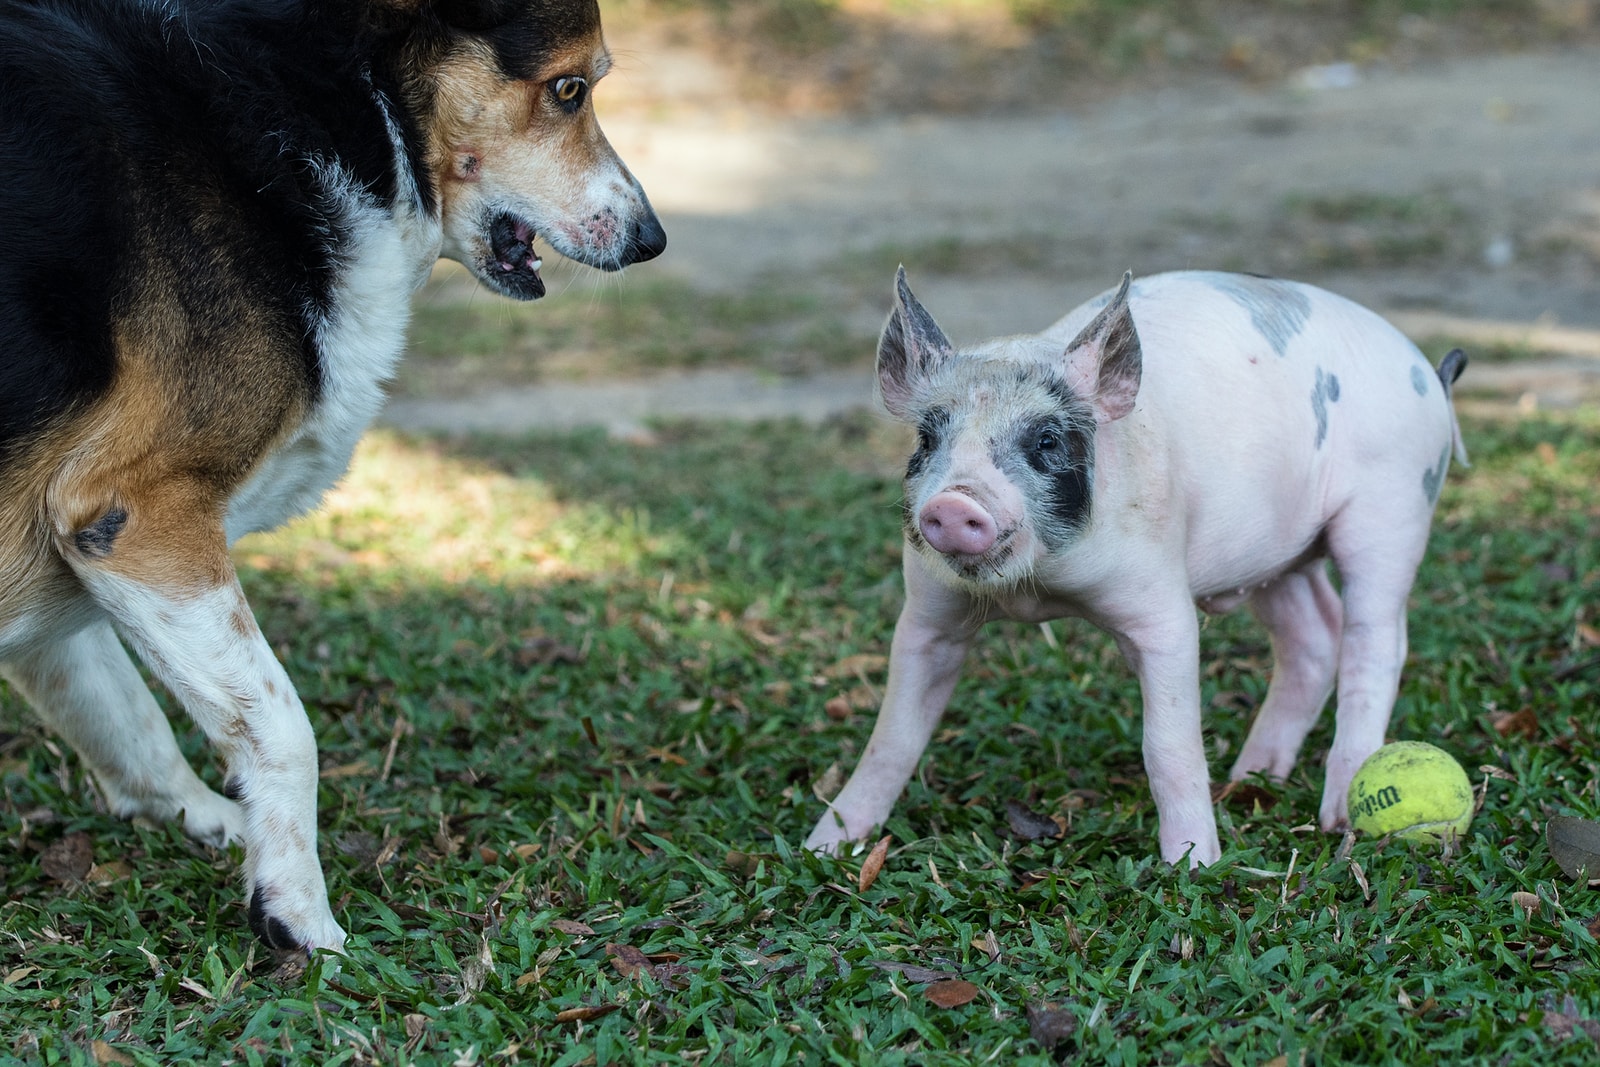 pink and gray pig beside dog